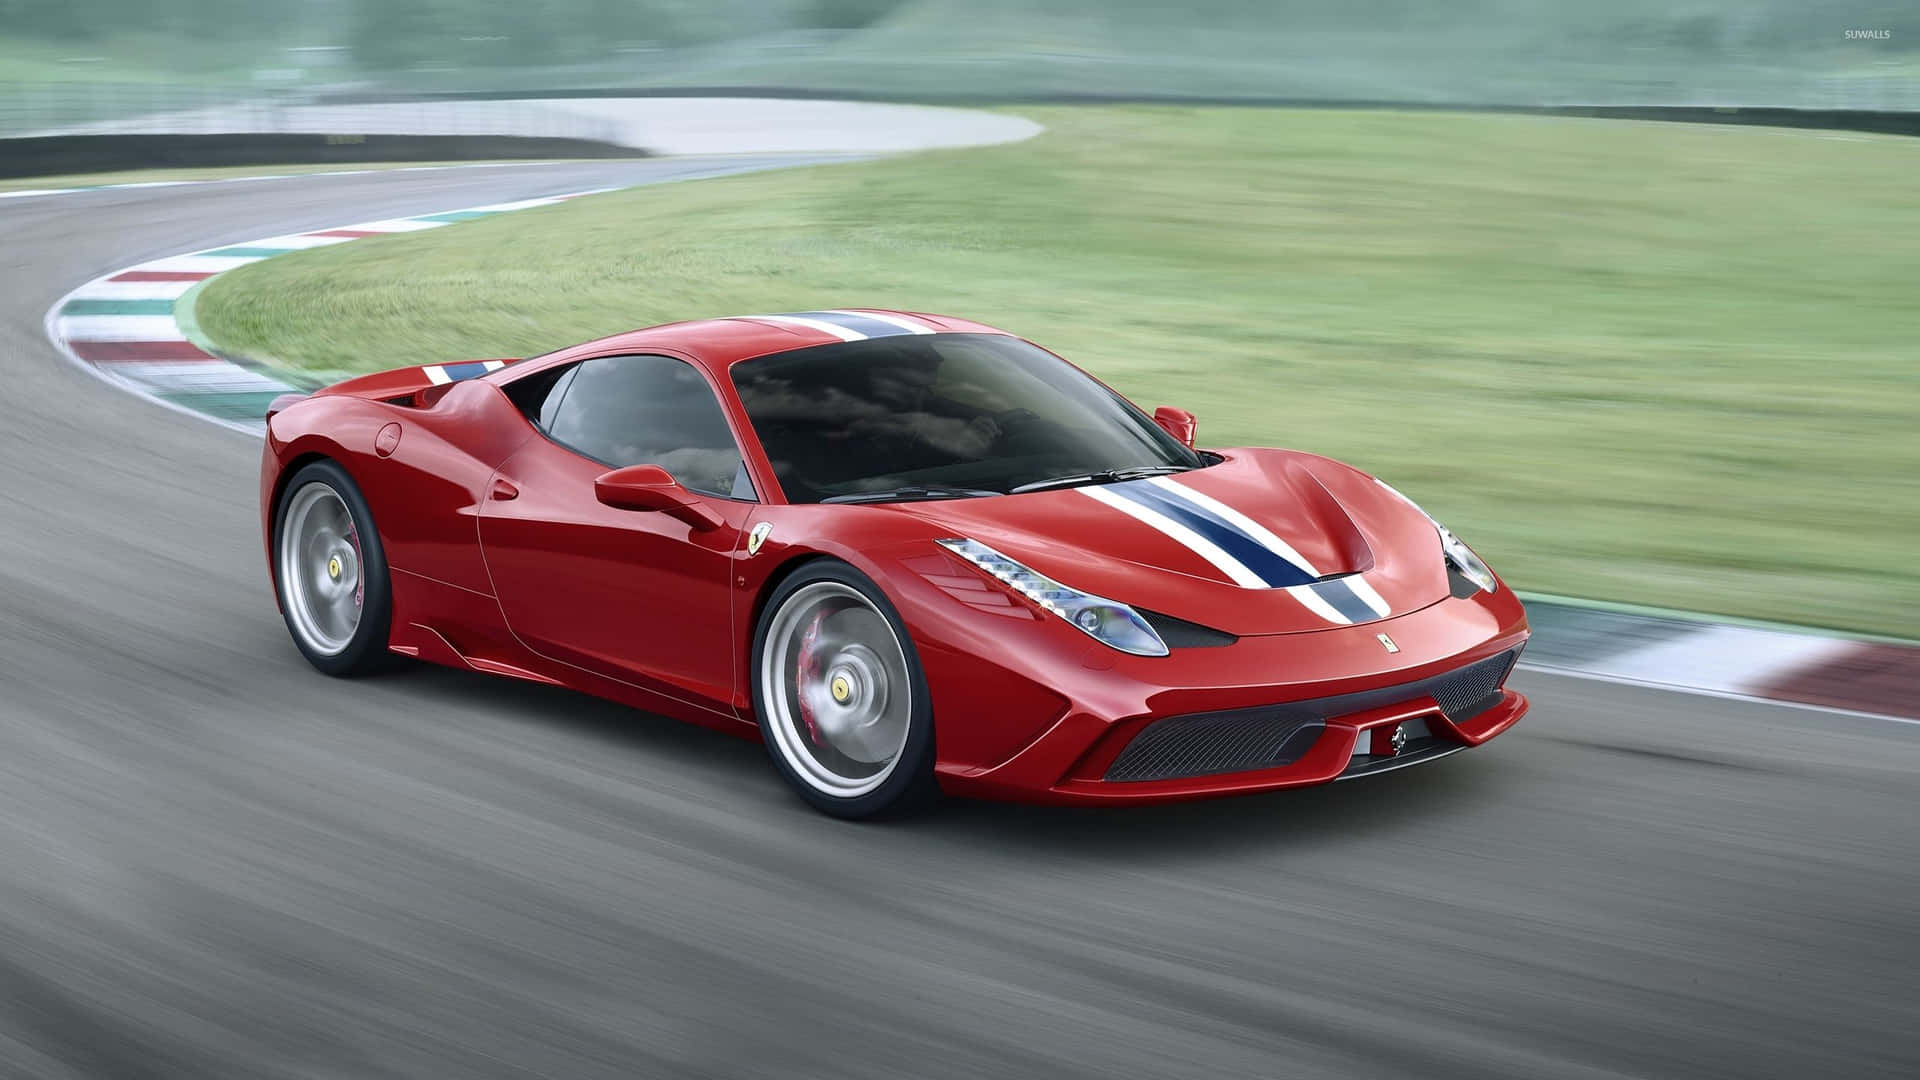 Stunning Red Ferrari 458 Speciale in Motion Wallpaper